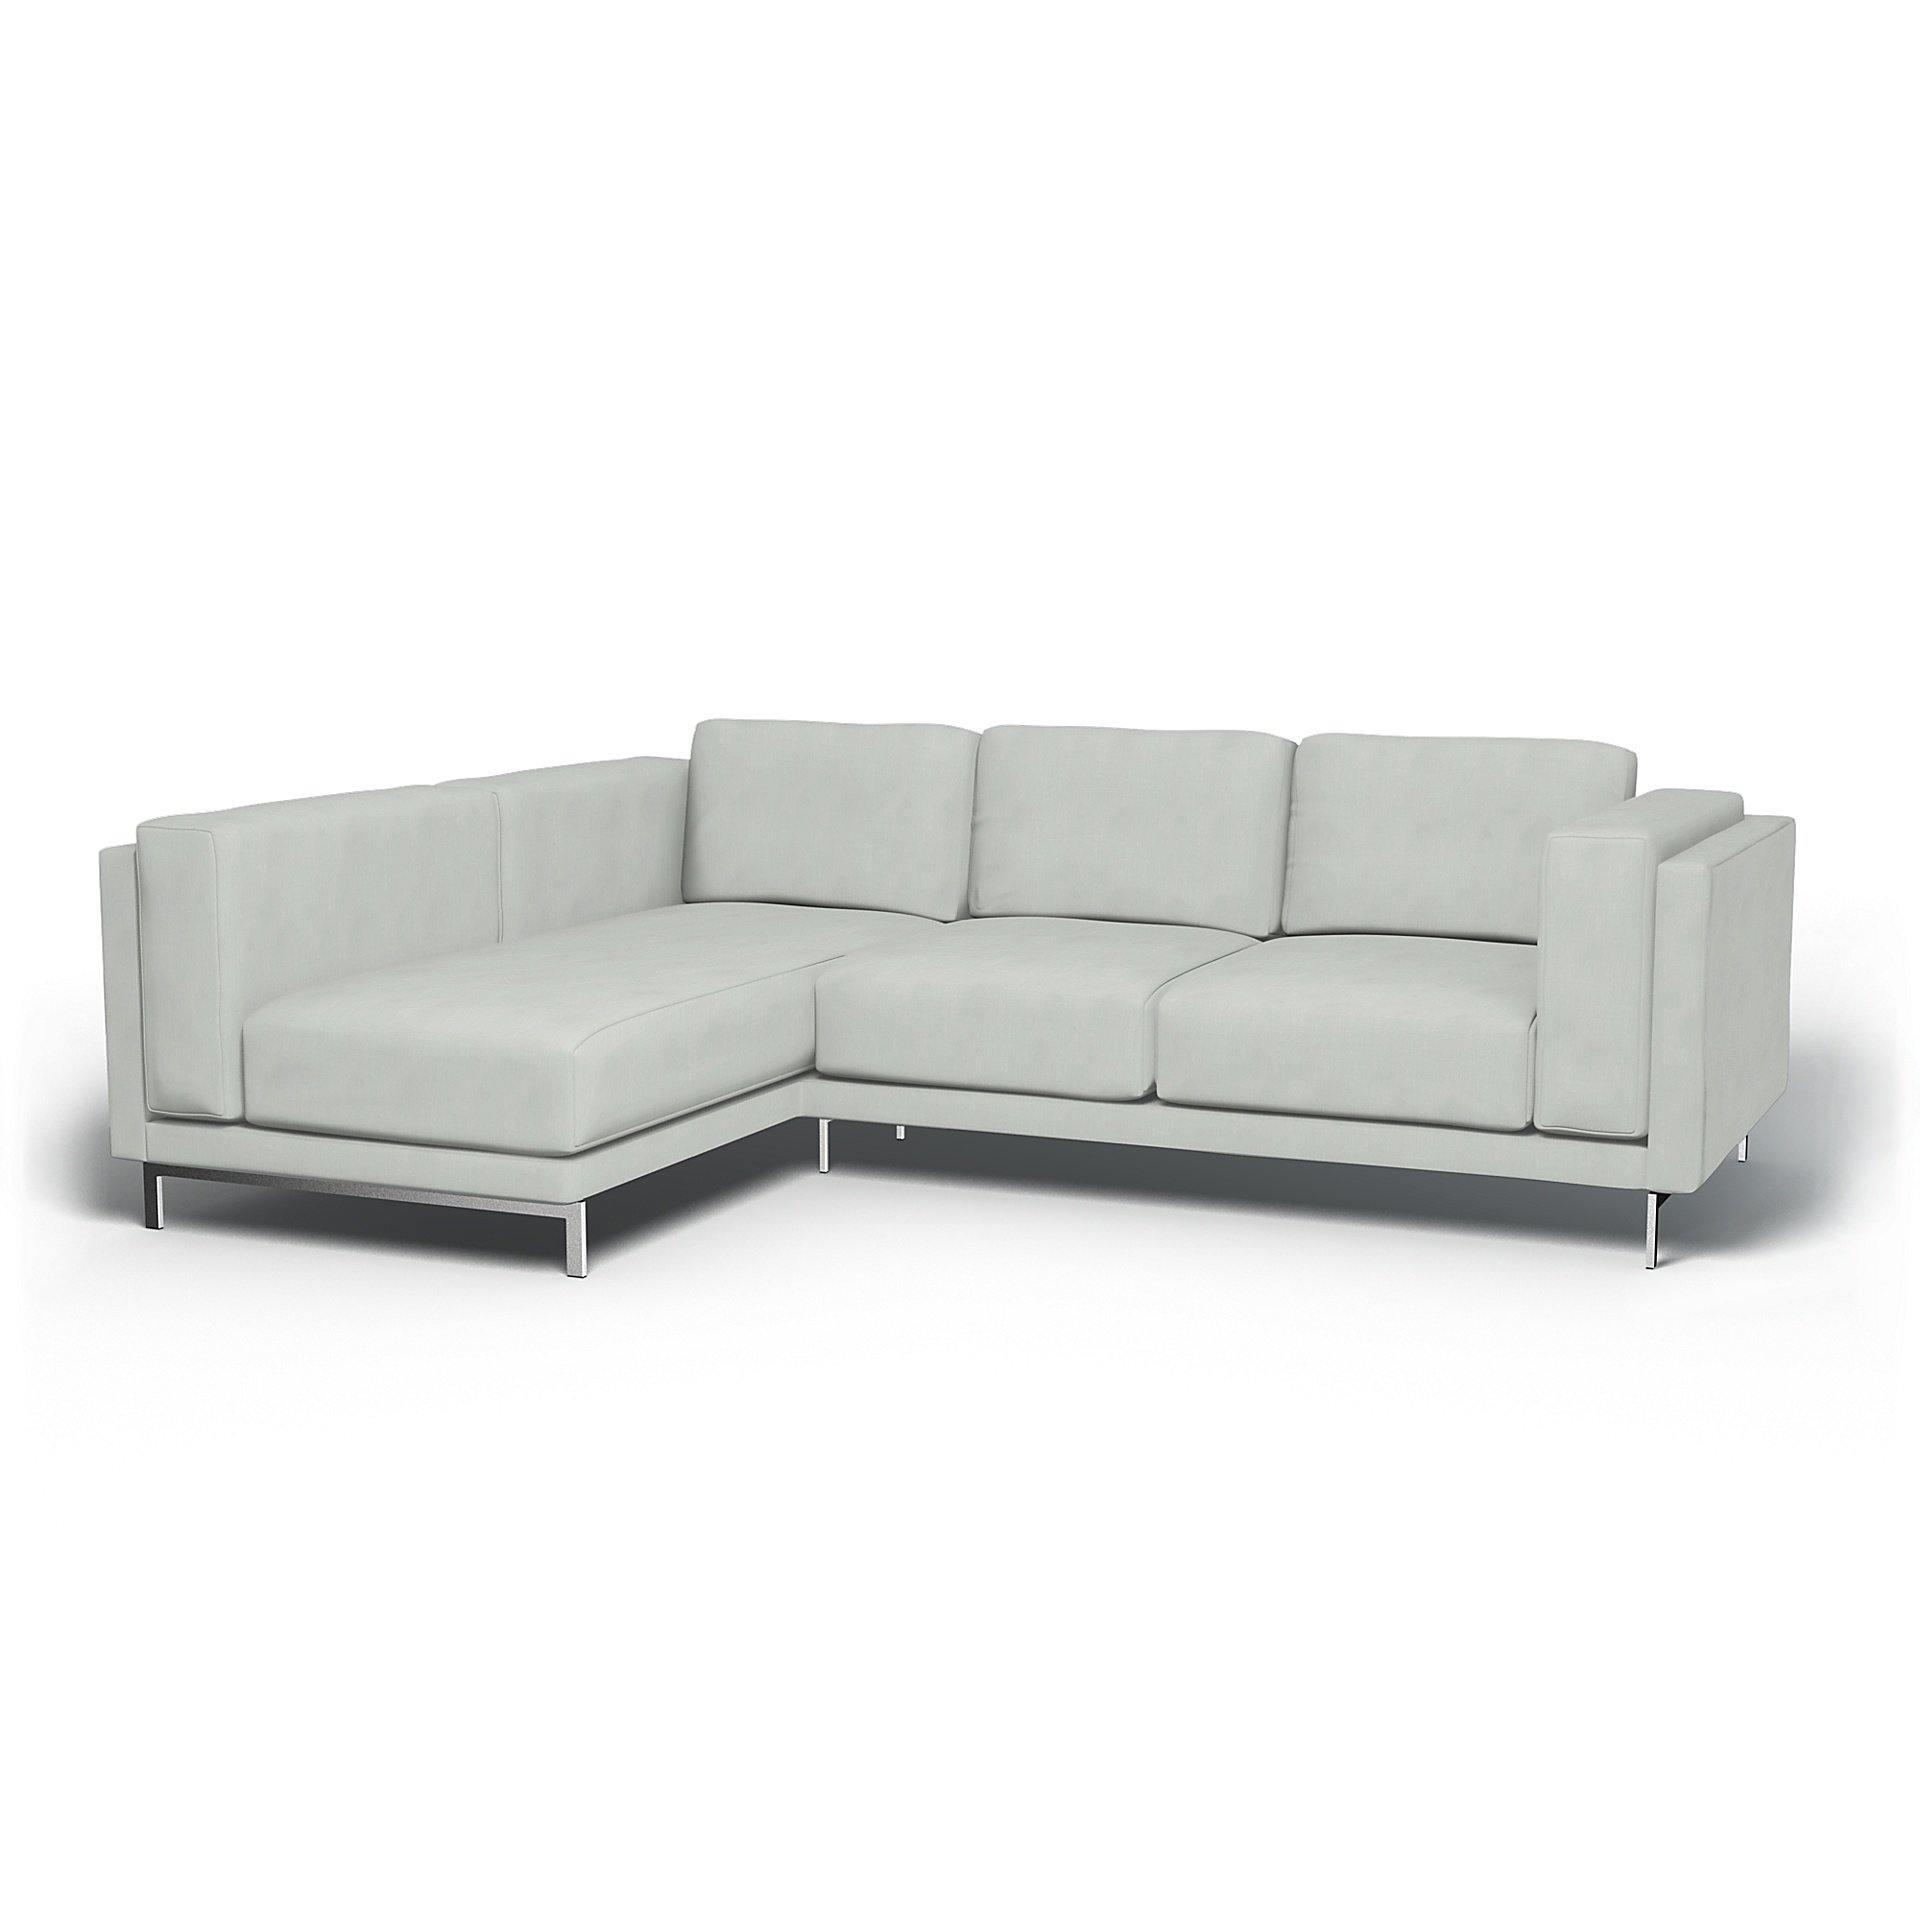 IKEA - Nockeby 3 Seater Sofa with Left Chaise Cover, Silver Grey, Linen - Bemz